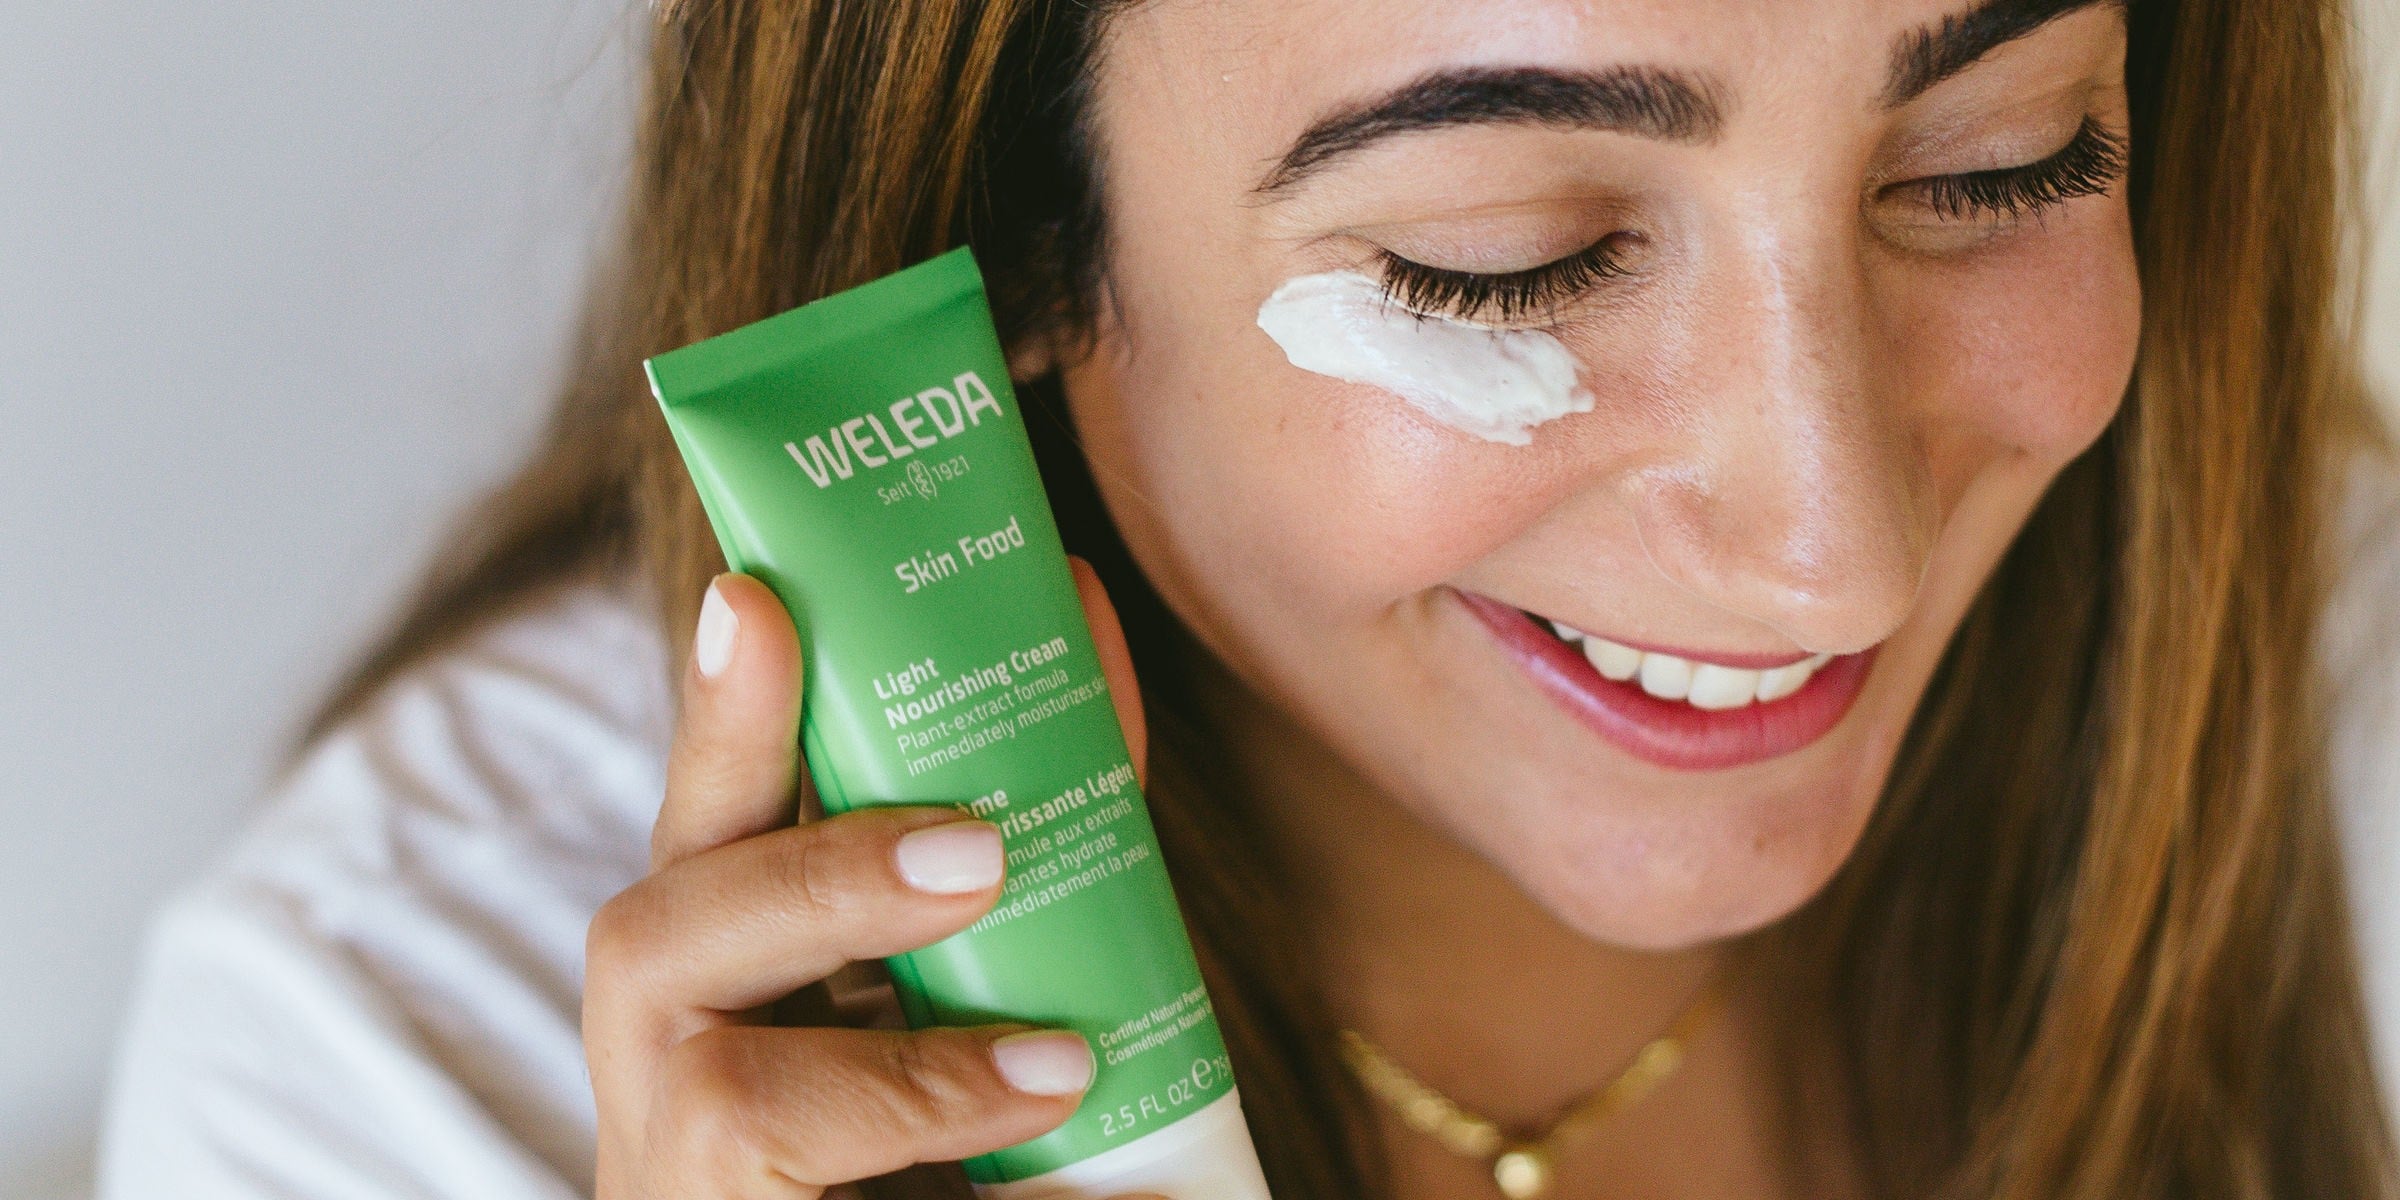 What Is Weleda Skin Food and Why Does Everyone Swear by It?